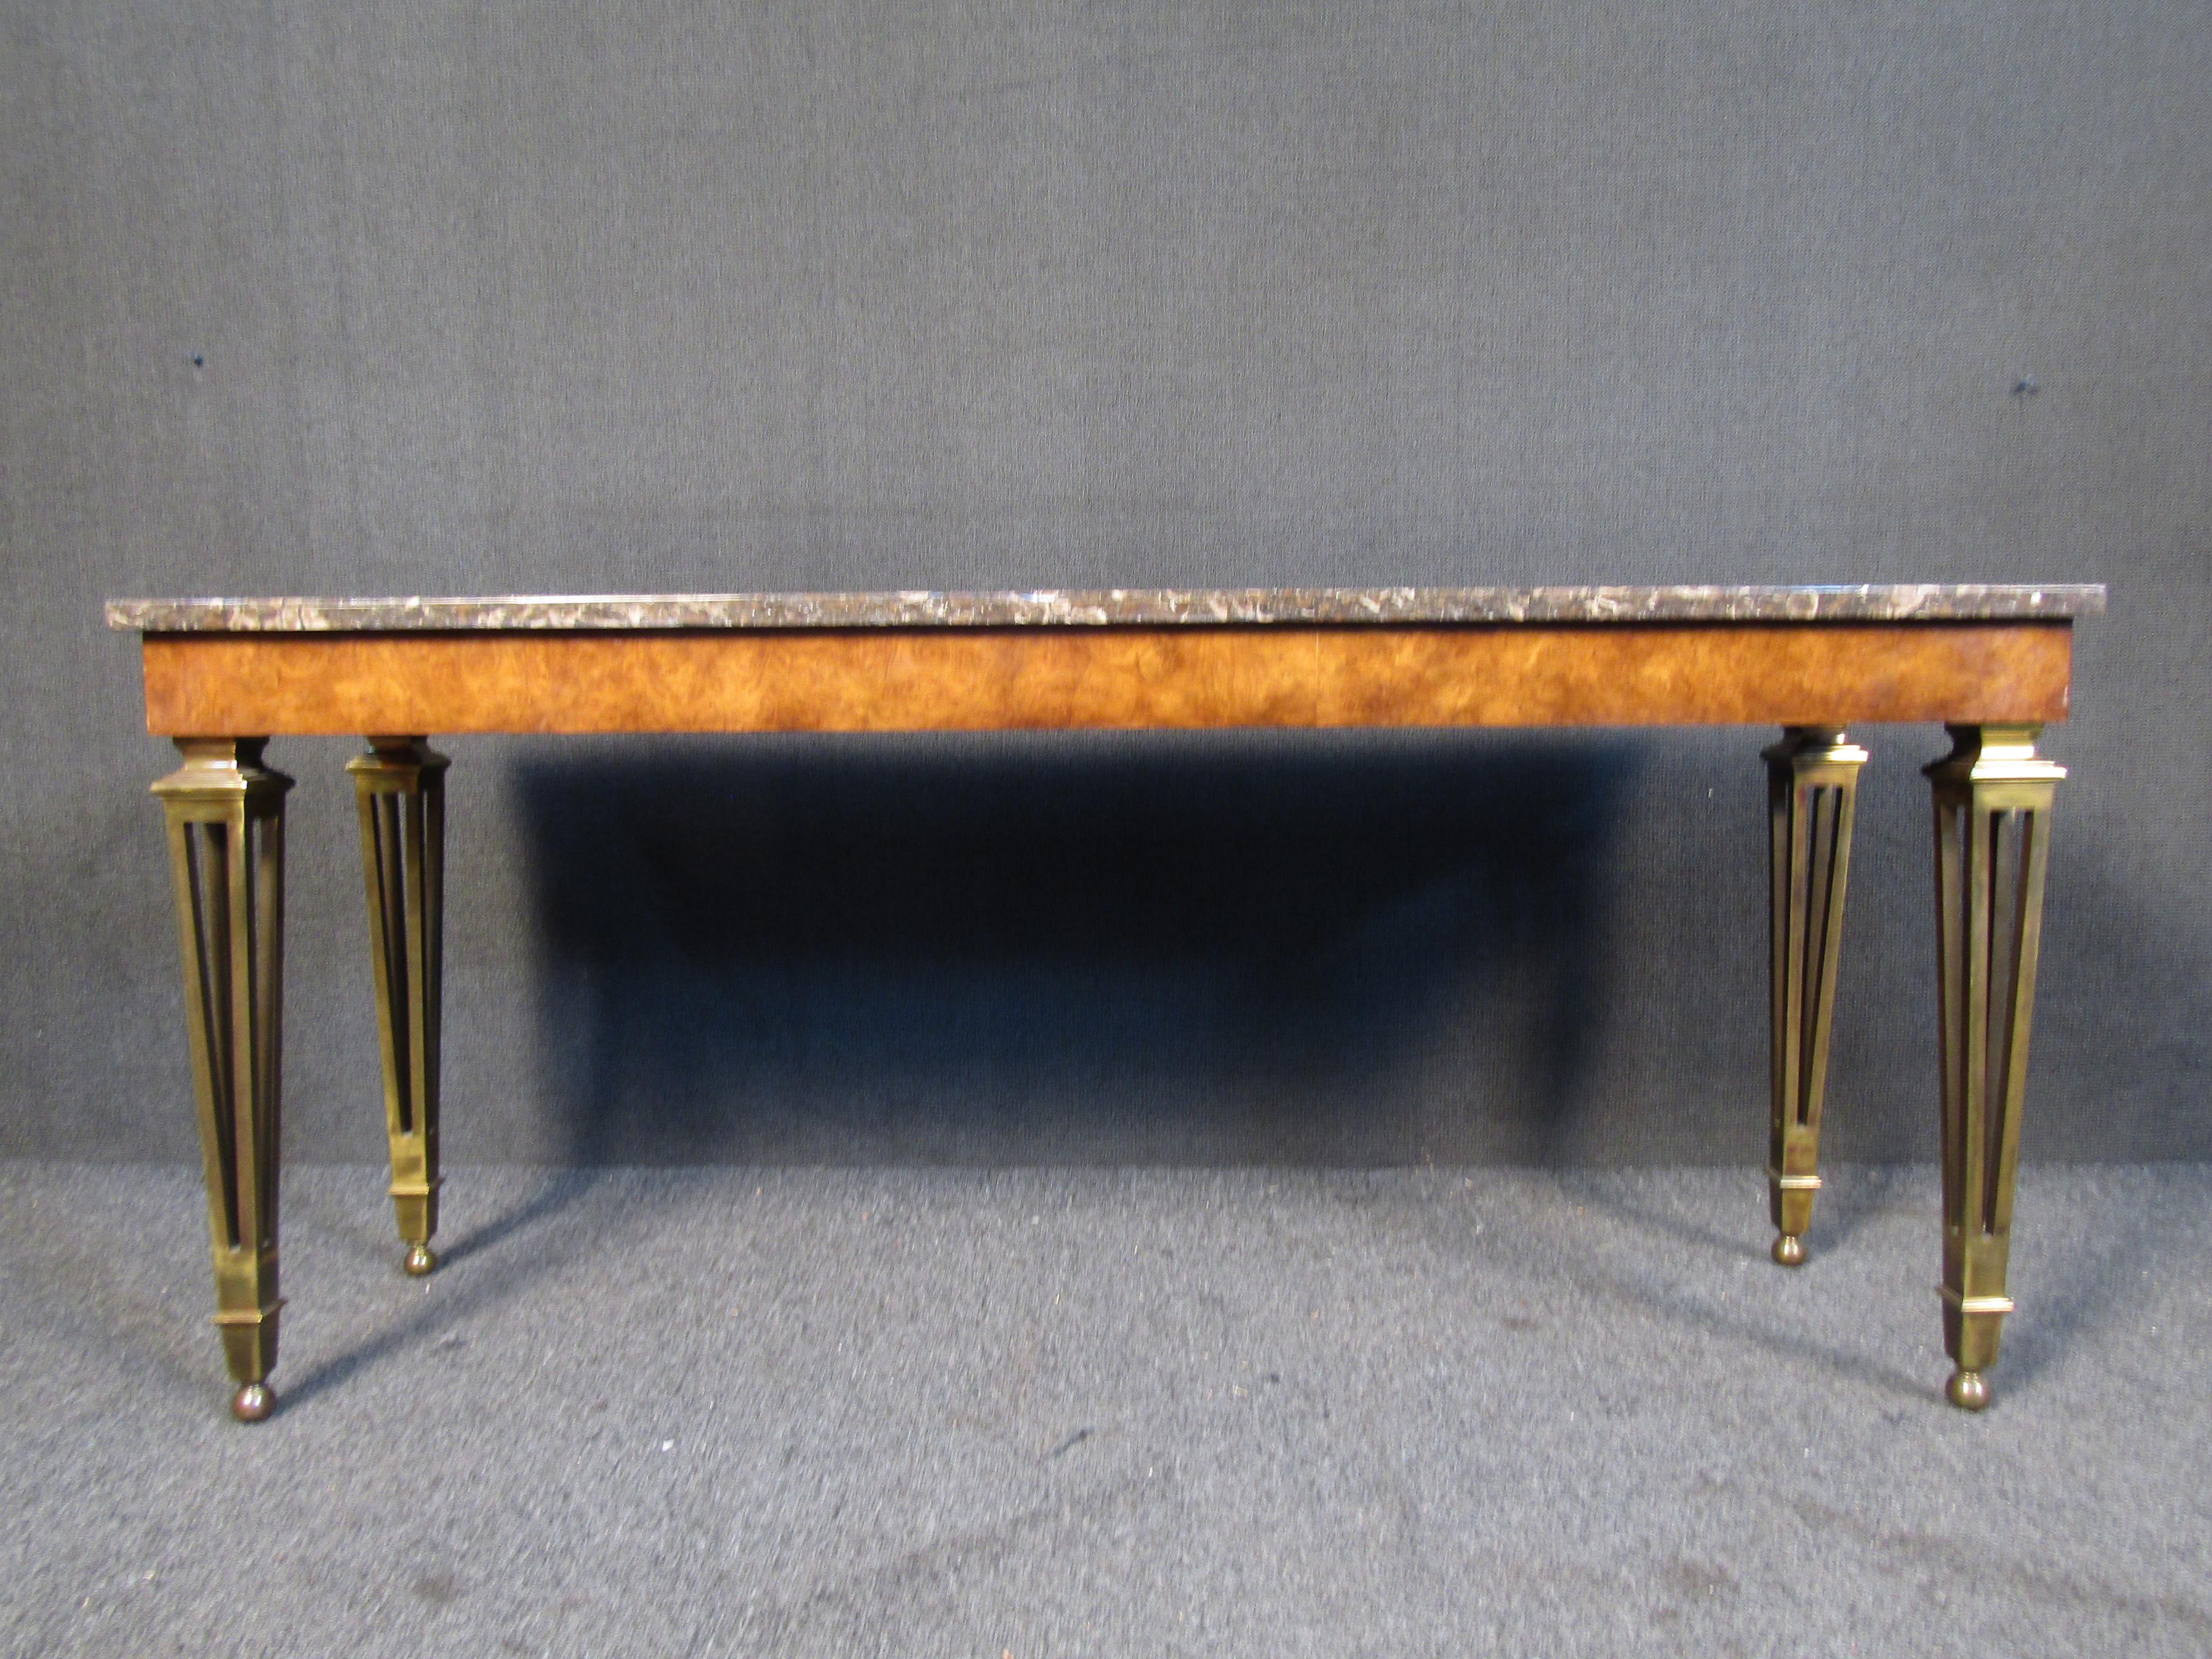 A vintage console table by Mastercraft that combines marble, burl wood, and ornate brass legs for a stunning Mid-Century Modern look. Please confirm item location with seller (NY/NJ).